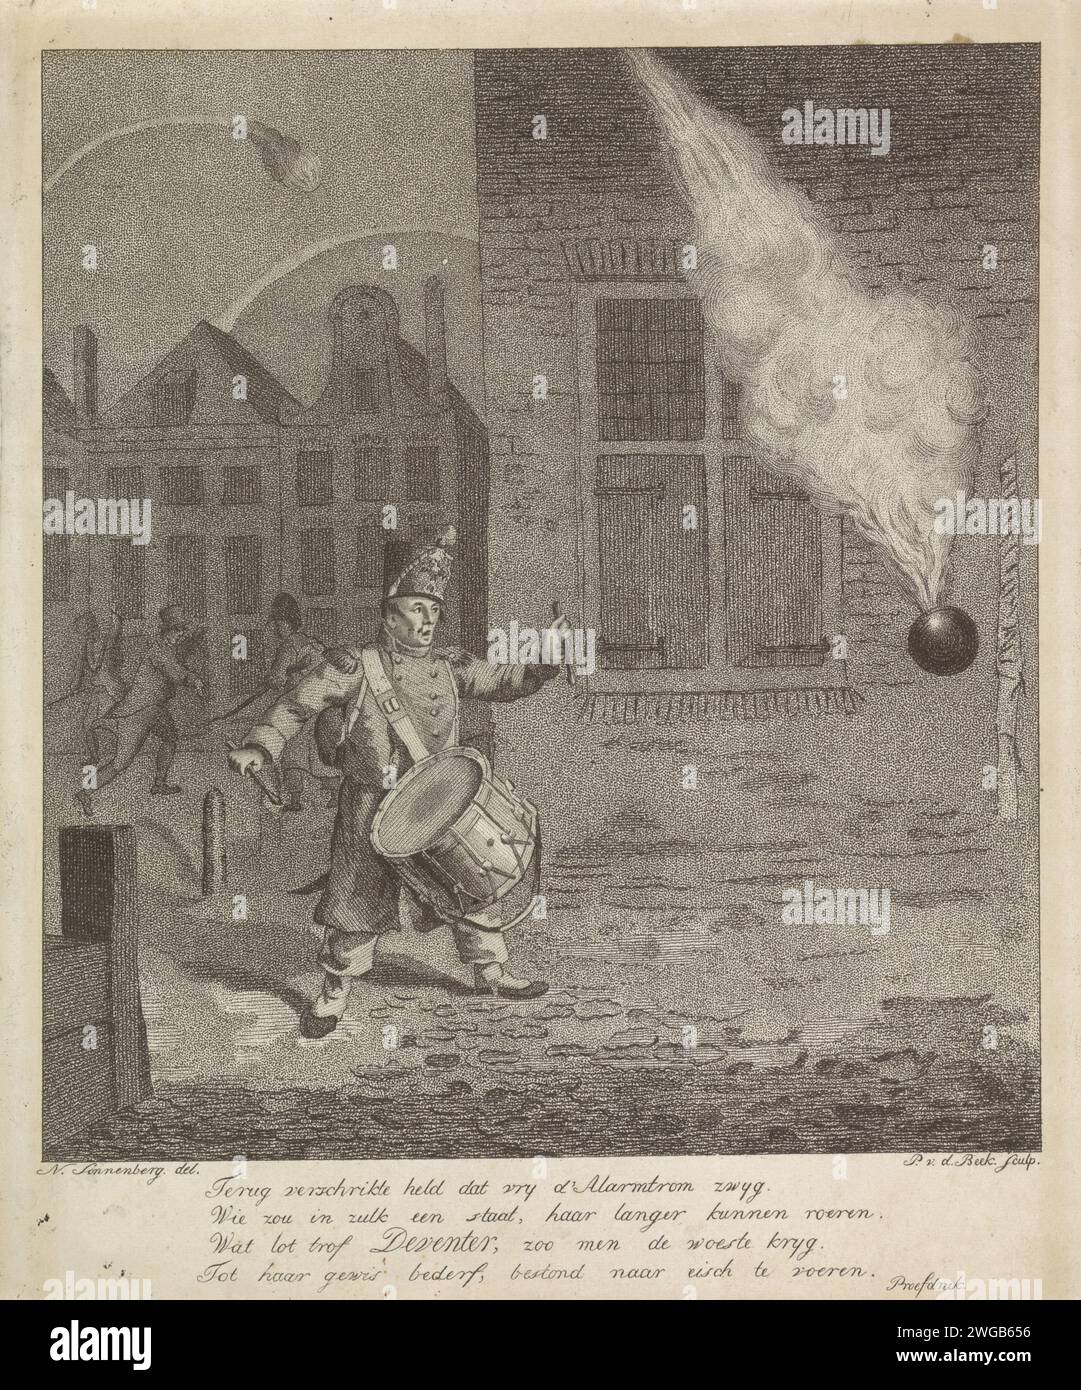 Deventer bombed by Kozaks, 1813, Pieter van der Beek, after Nicolaas Sonnenberg, 1813 print During the bombing of Deventer through the Russian Cossacks, forget to take the guard on the fright on the alarm drum when a bomb is close to him, 23 (?) November 1813. With four -line verse. Netherlands paper etching / engraving bombardment  siege. bombardment. guard duty, keeping sentry. (military) signals Deventer Stock Photo